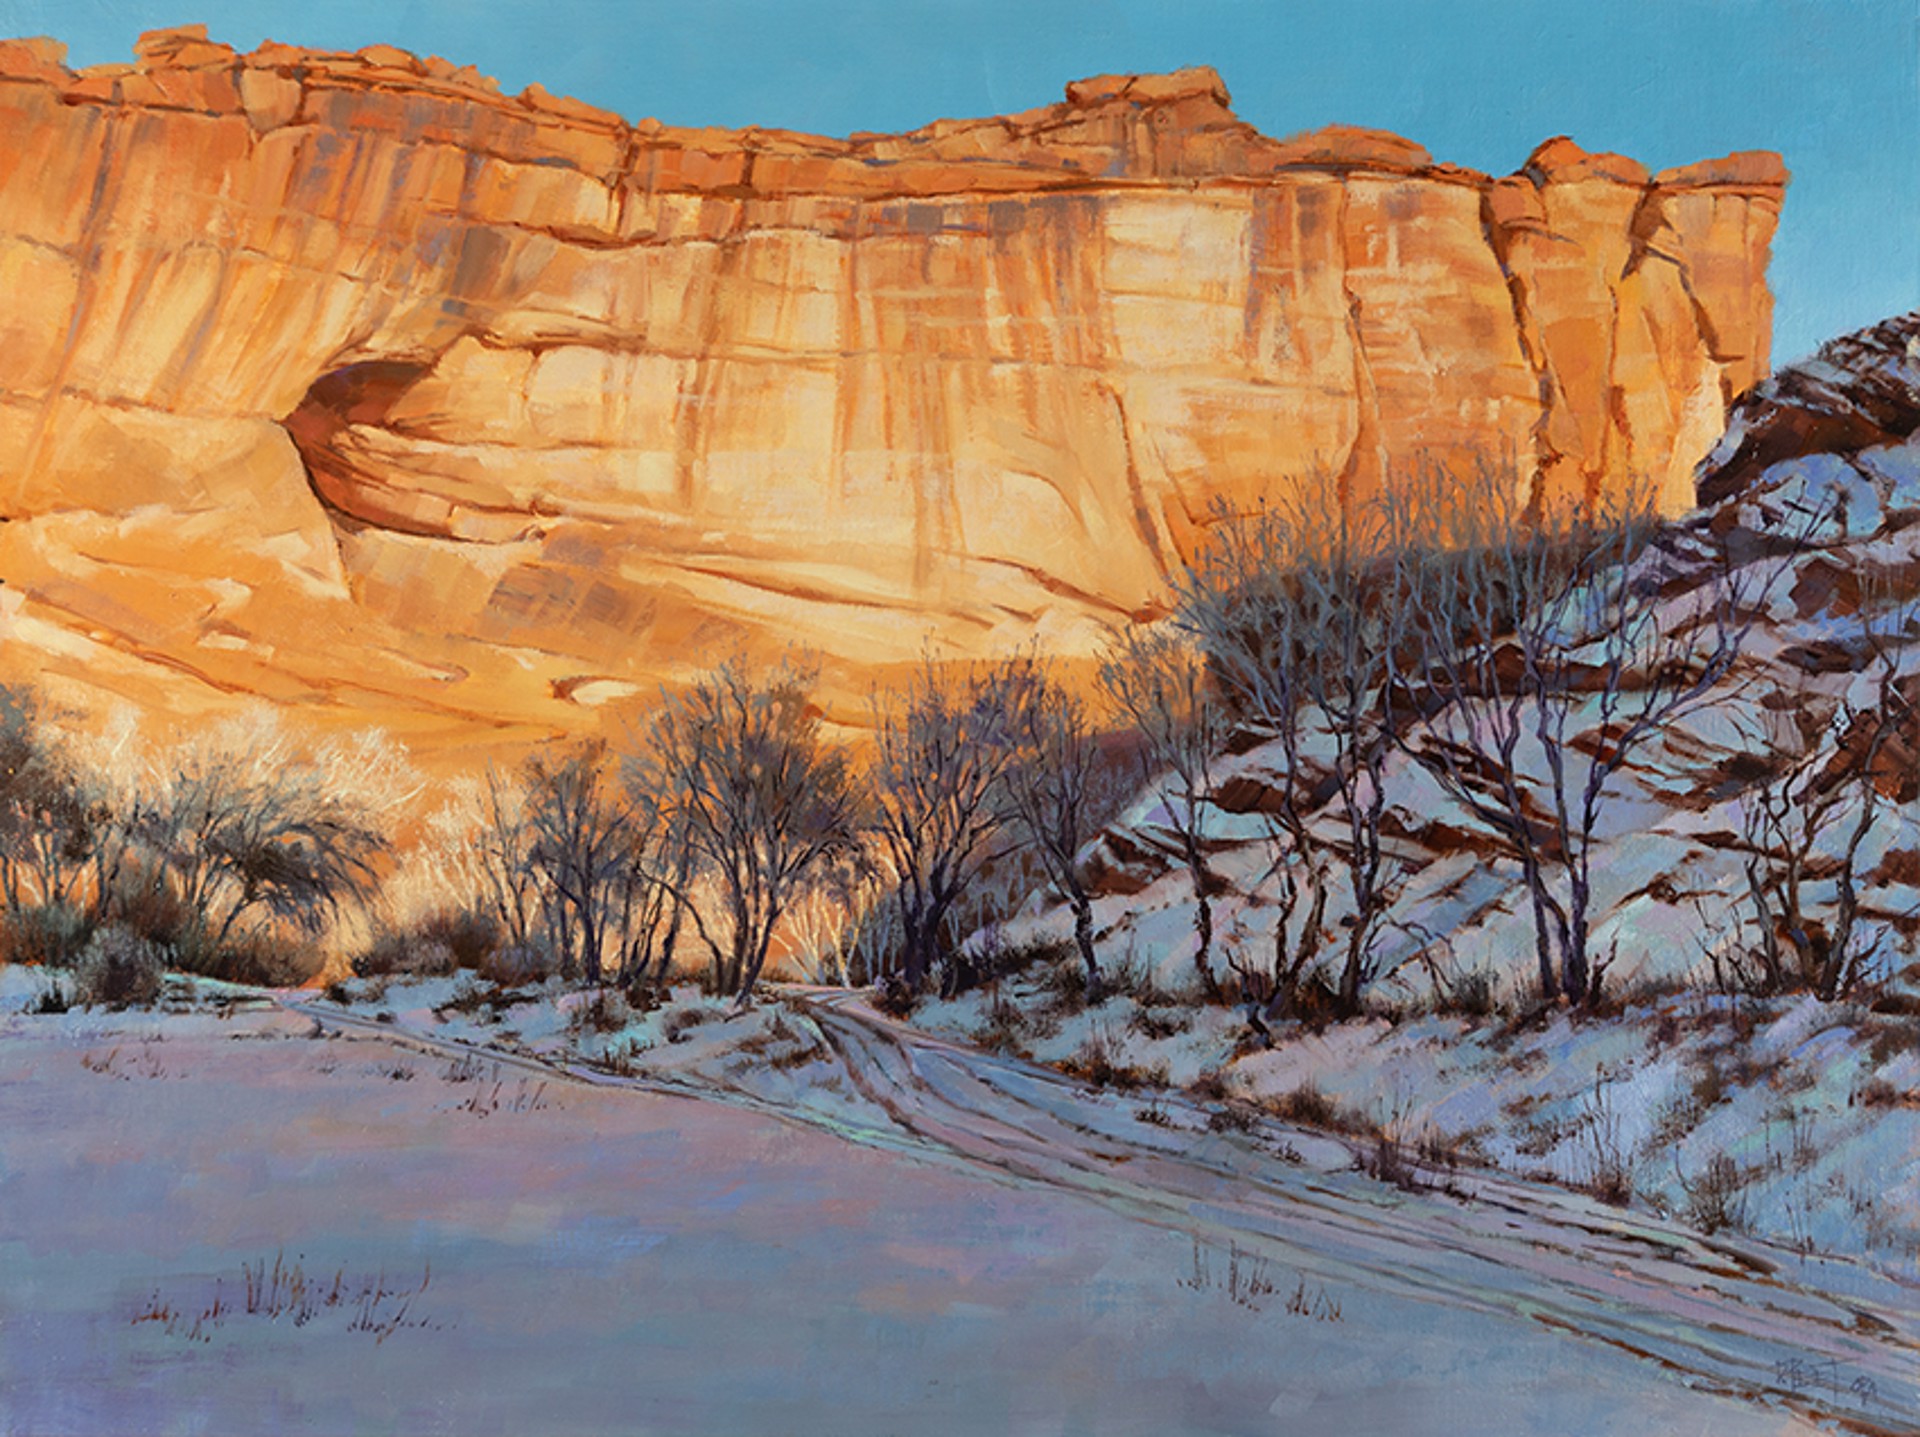 What Stories These Walls Could Tell - Canyon De Chelly by Darcie Peet